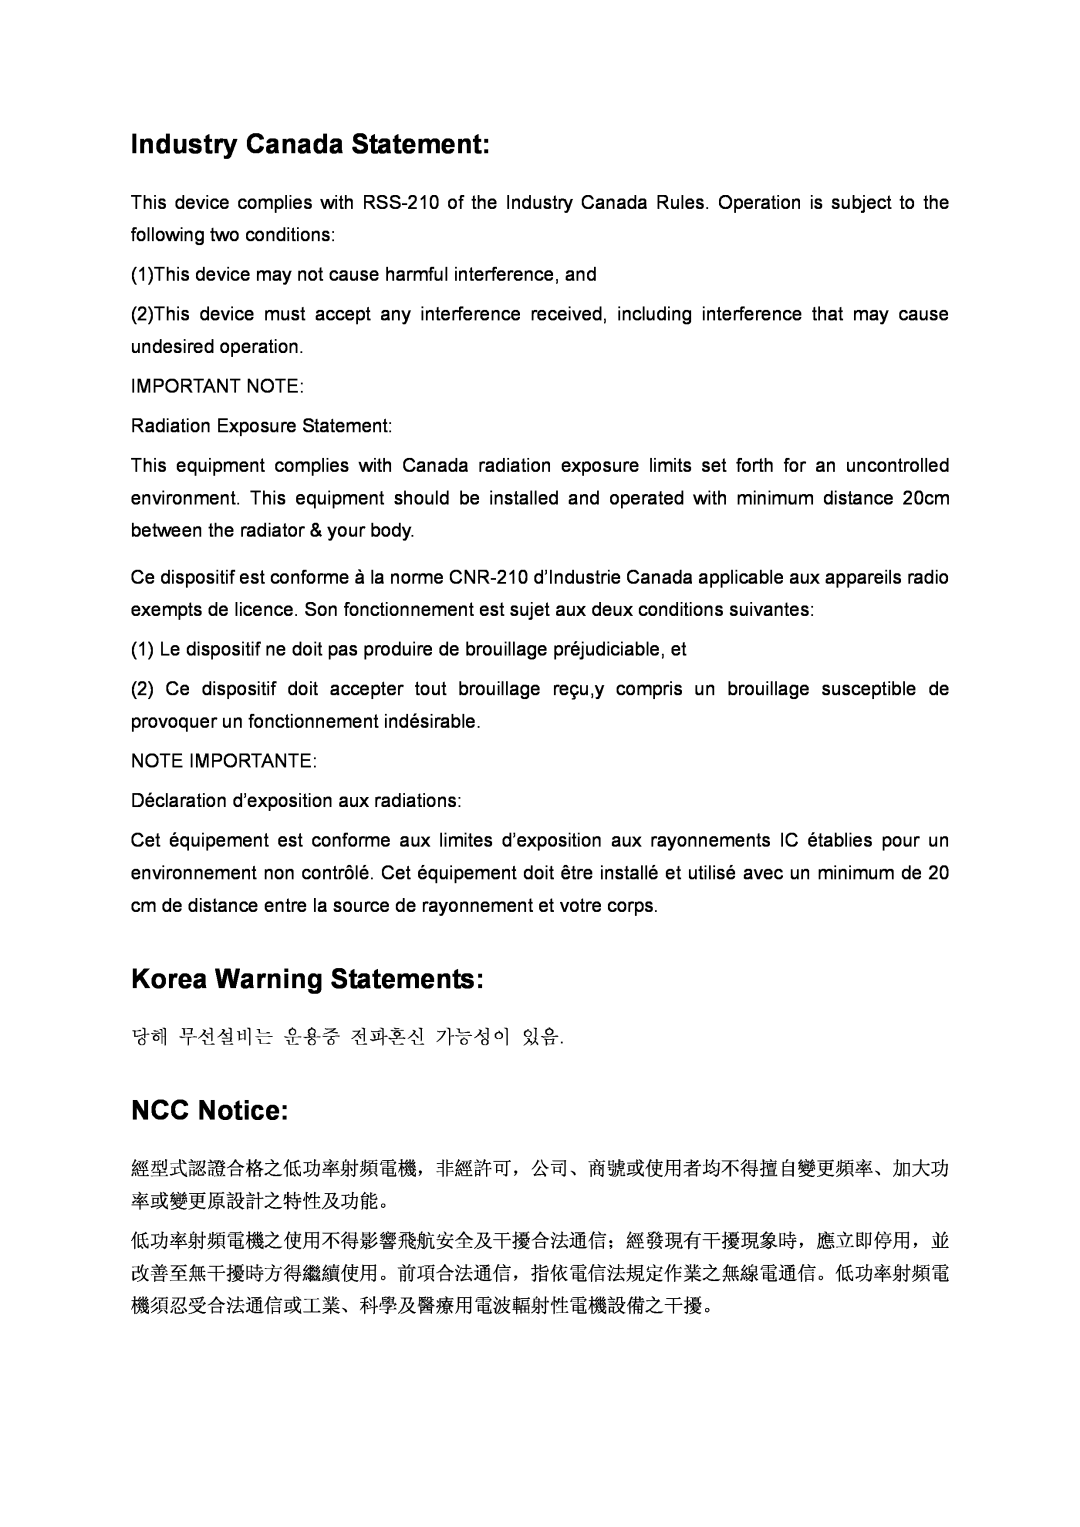 TP-Link TL-WR1043ND manual Industry Canada Statement, Korea Warning Statements, NCC Notice 